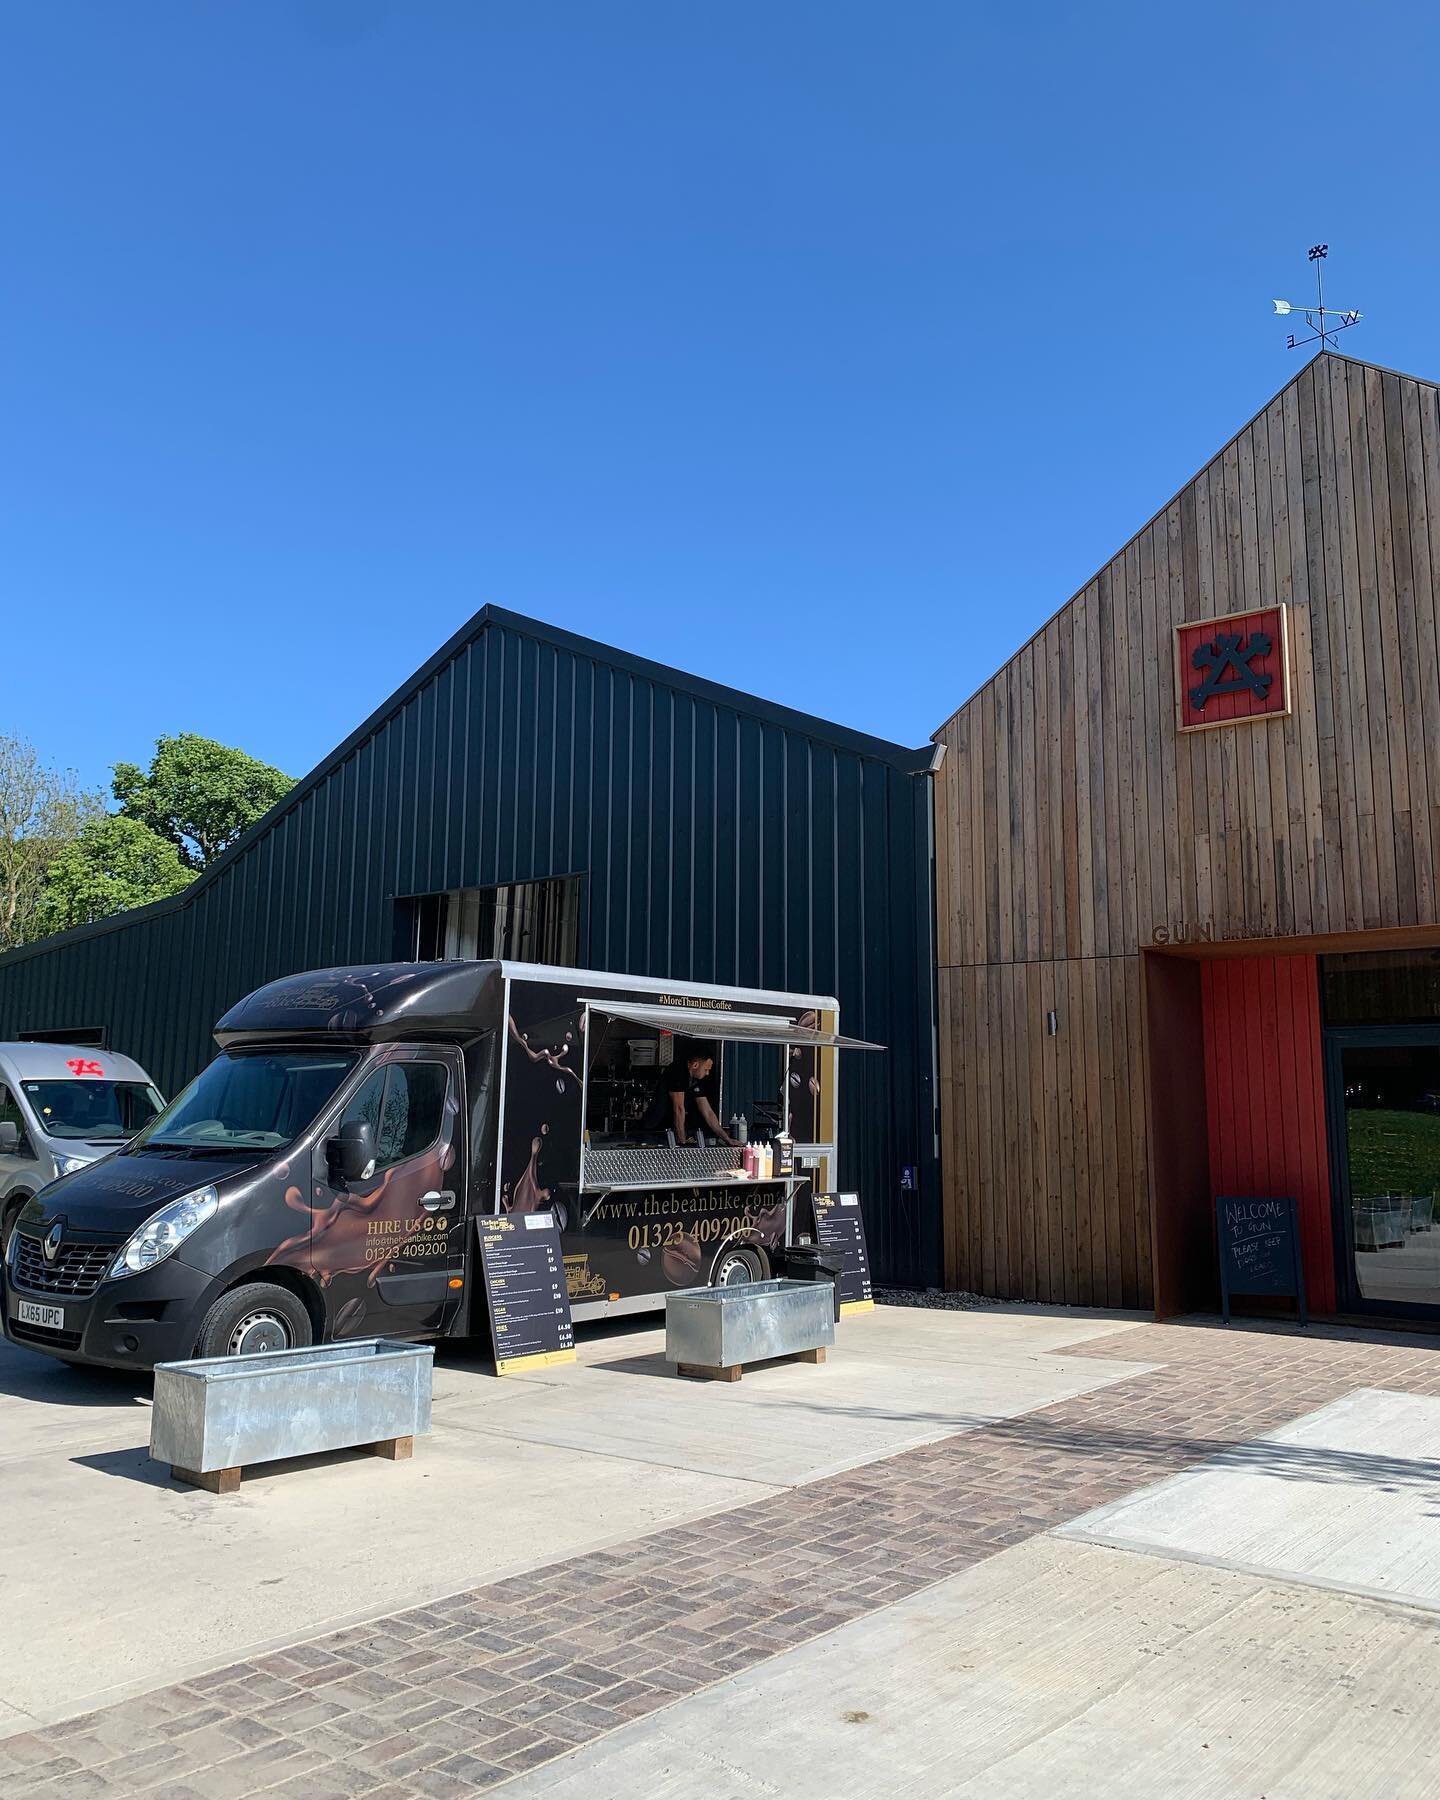 Come and find us at @gunbrewery tonight, Friday and Saturday! Serving Smashed Burgers, Chicken Burgers, a Vegan Keema Burger and a selection of Fries! 🍔 🍟 Pop down and say hello! 👋